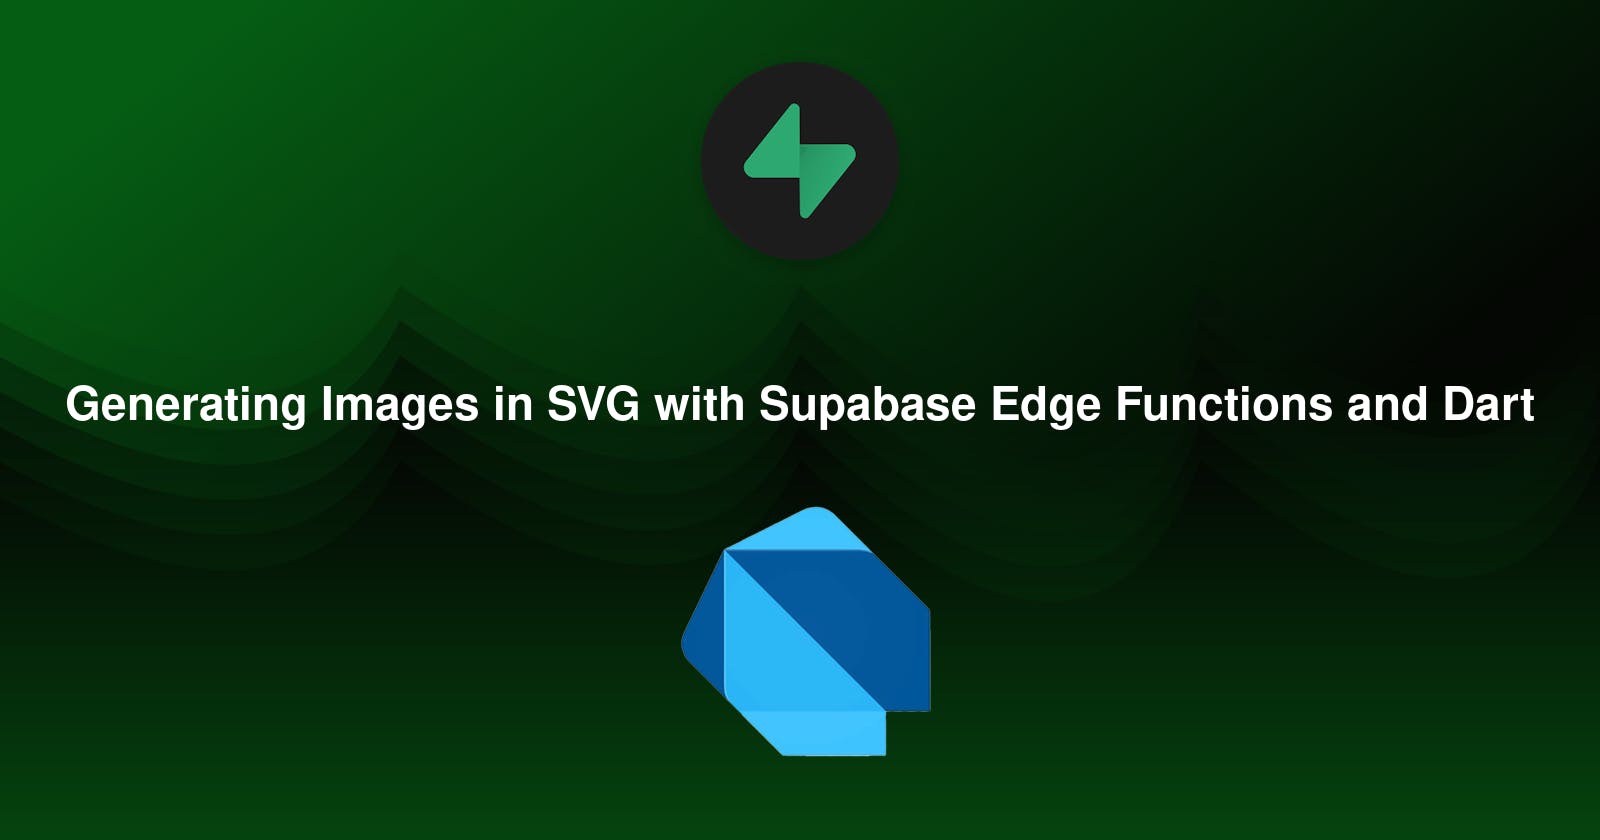 Generating Images in SVG with Supabase Edge Functions and Dart